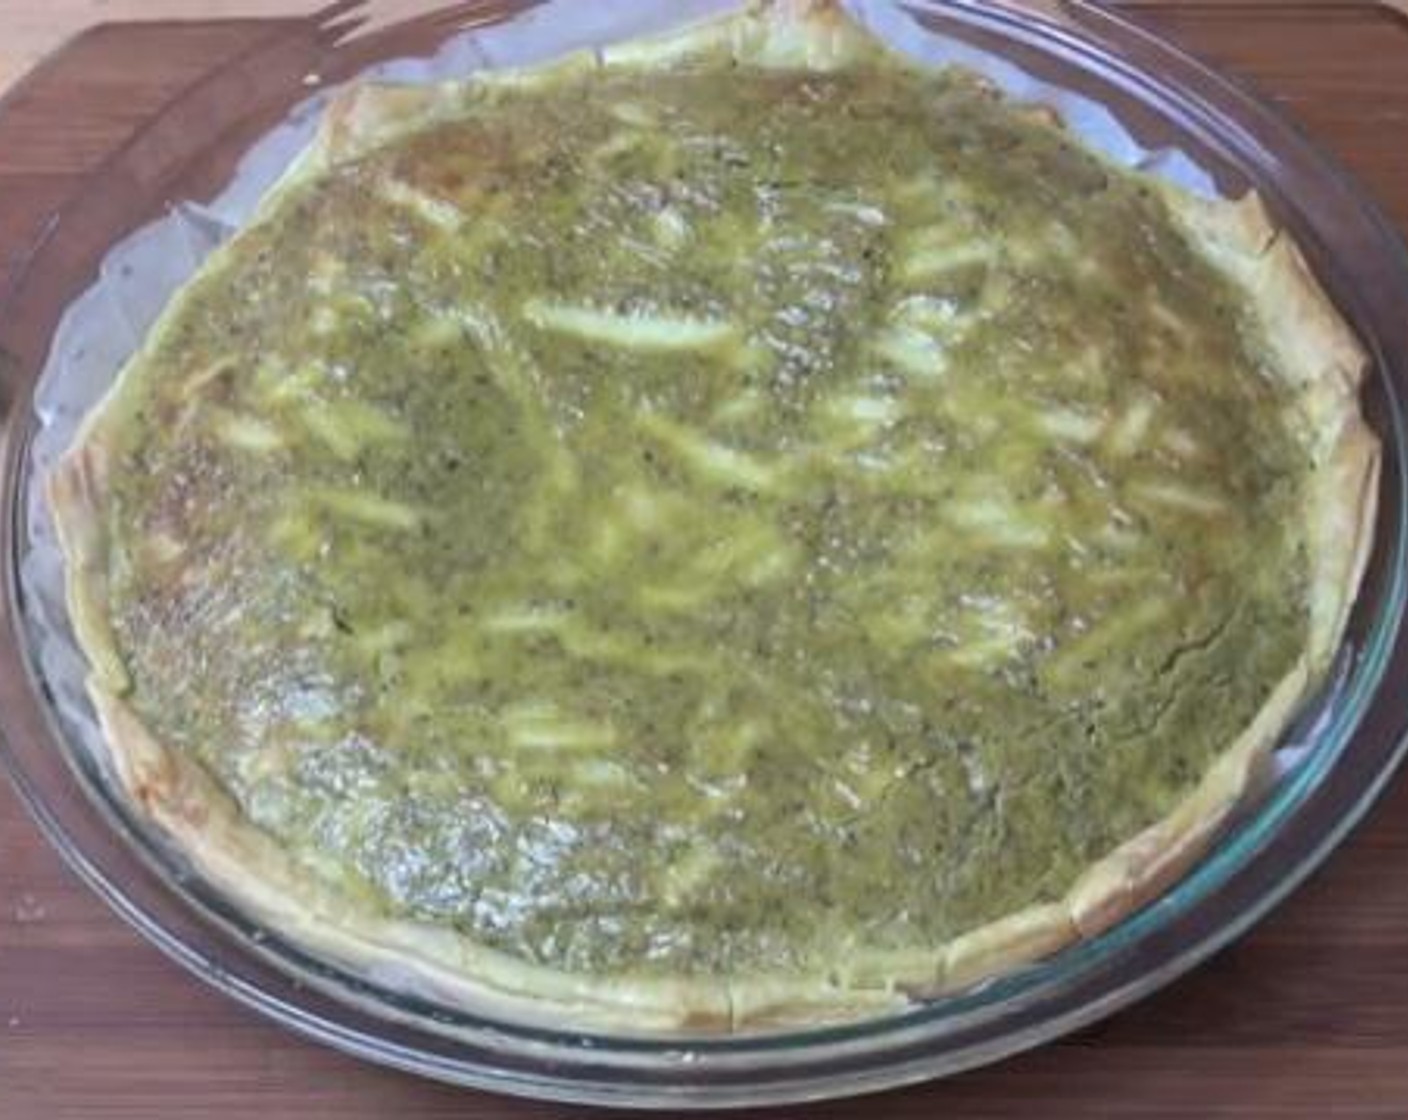 step 5 Leave the quiche aside to cool for about 10 minutes. Serve and enjoy!